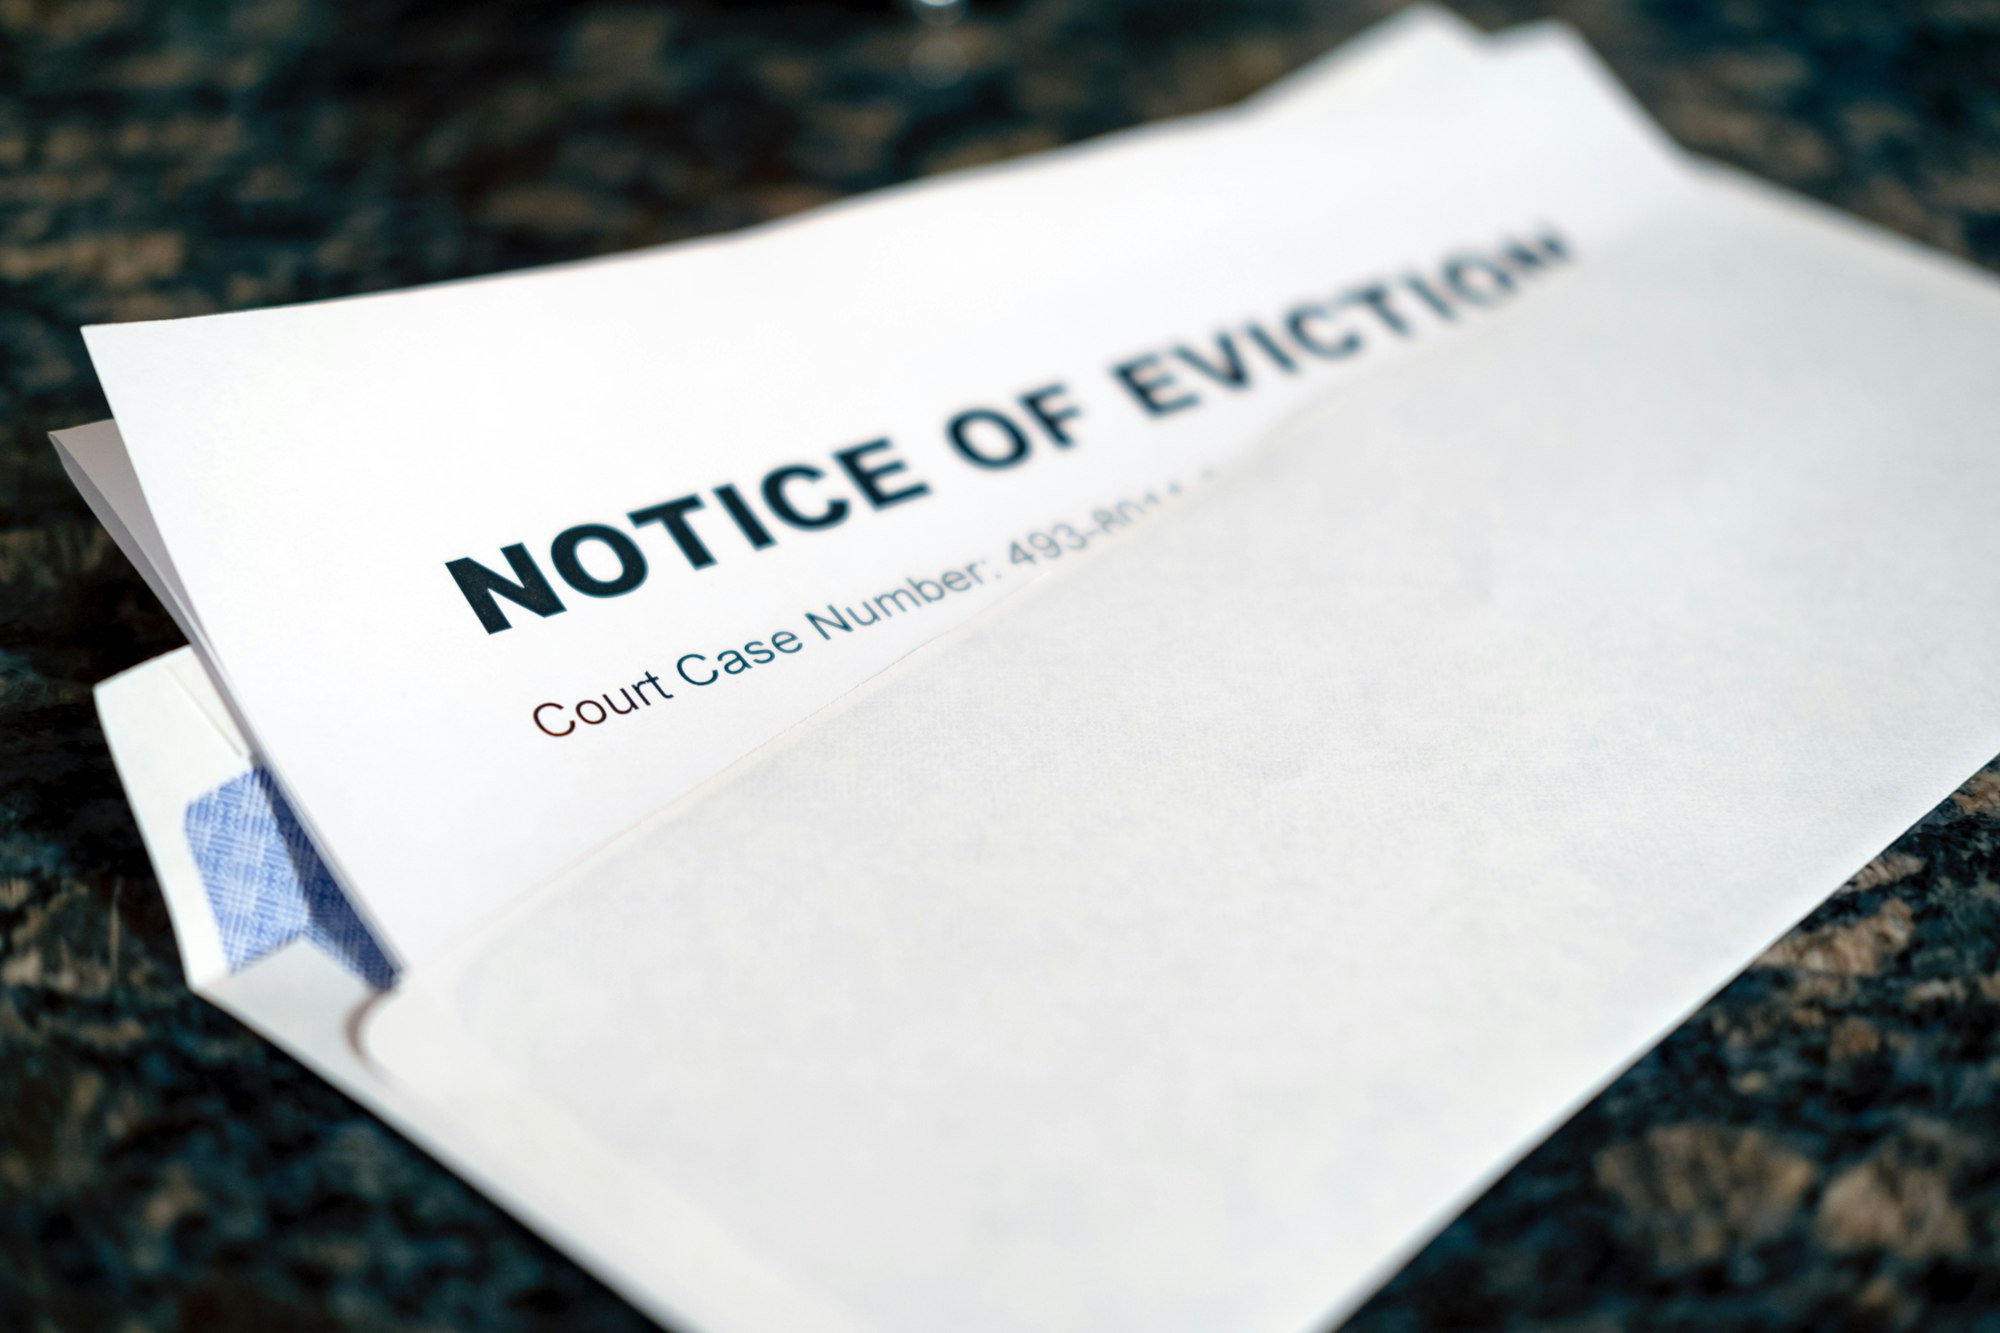 52 Weeks of Writing: Week 47—I got the eviction notice on my birthday.